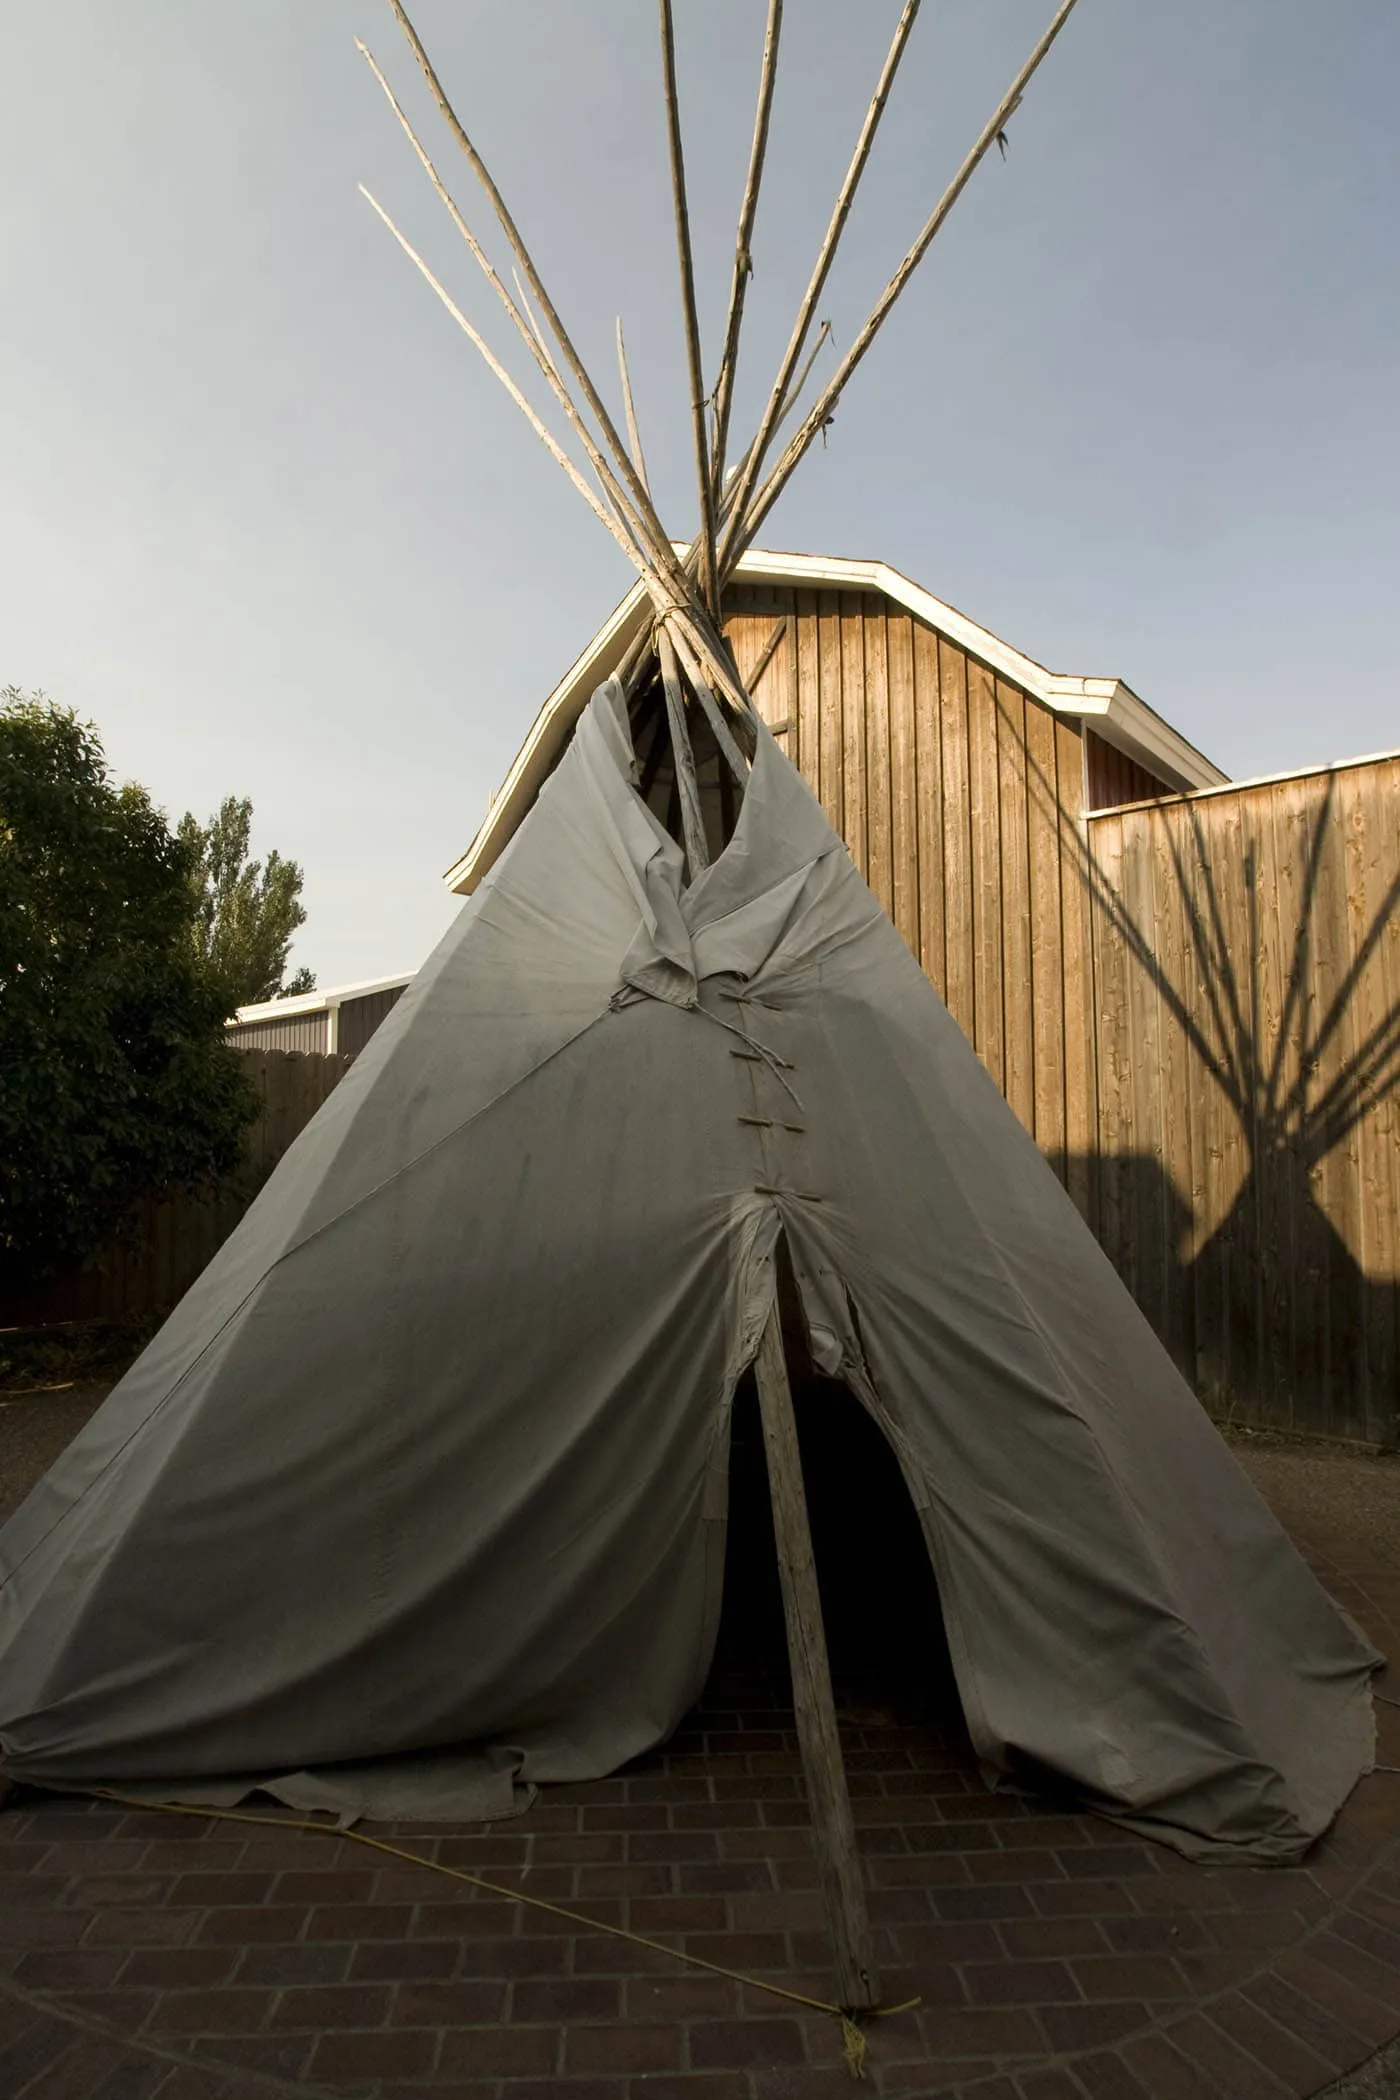 TeePee at Wall Drug Store in Wall, South Dakota